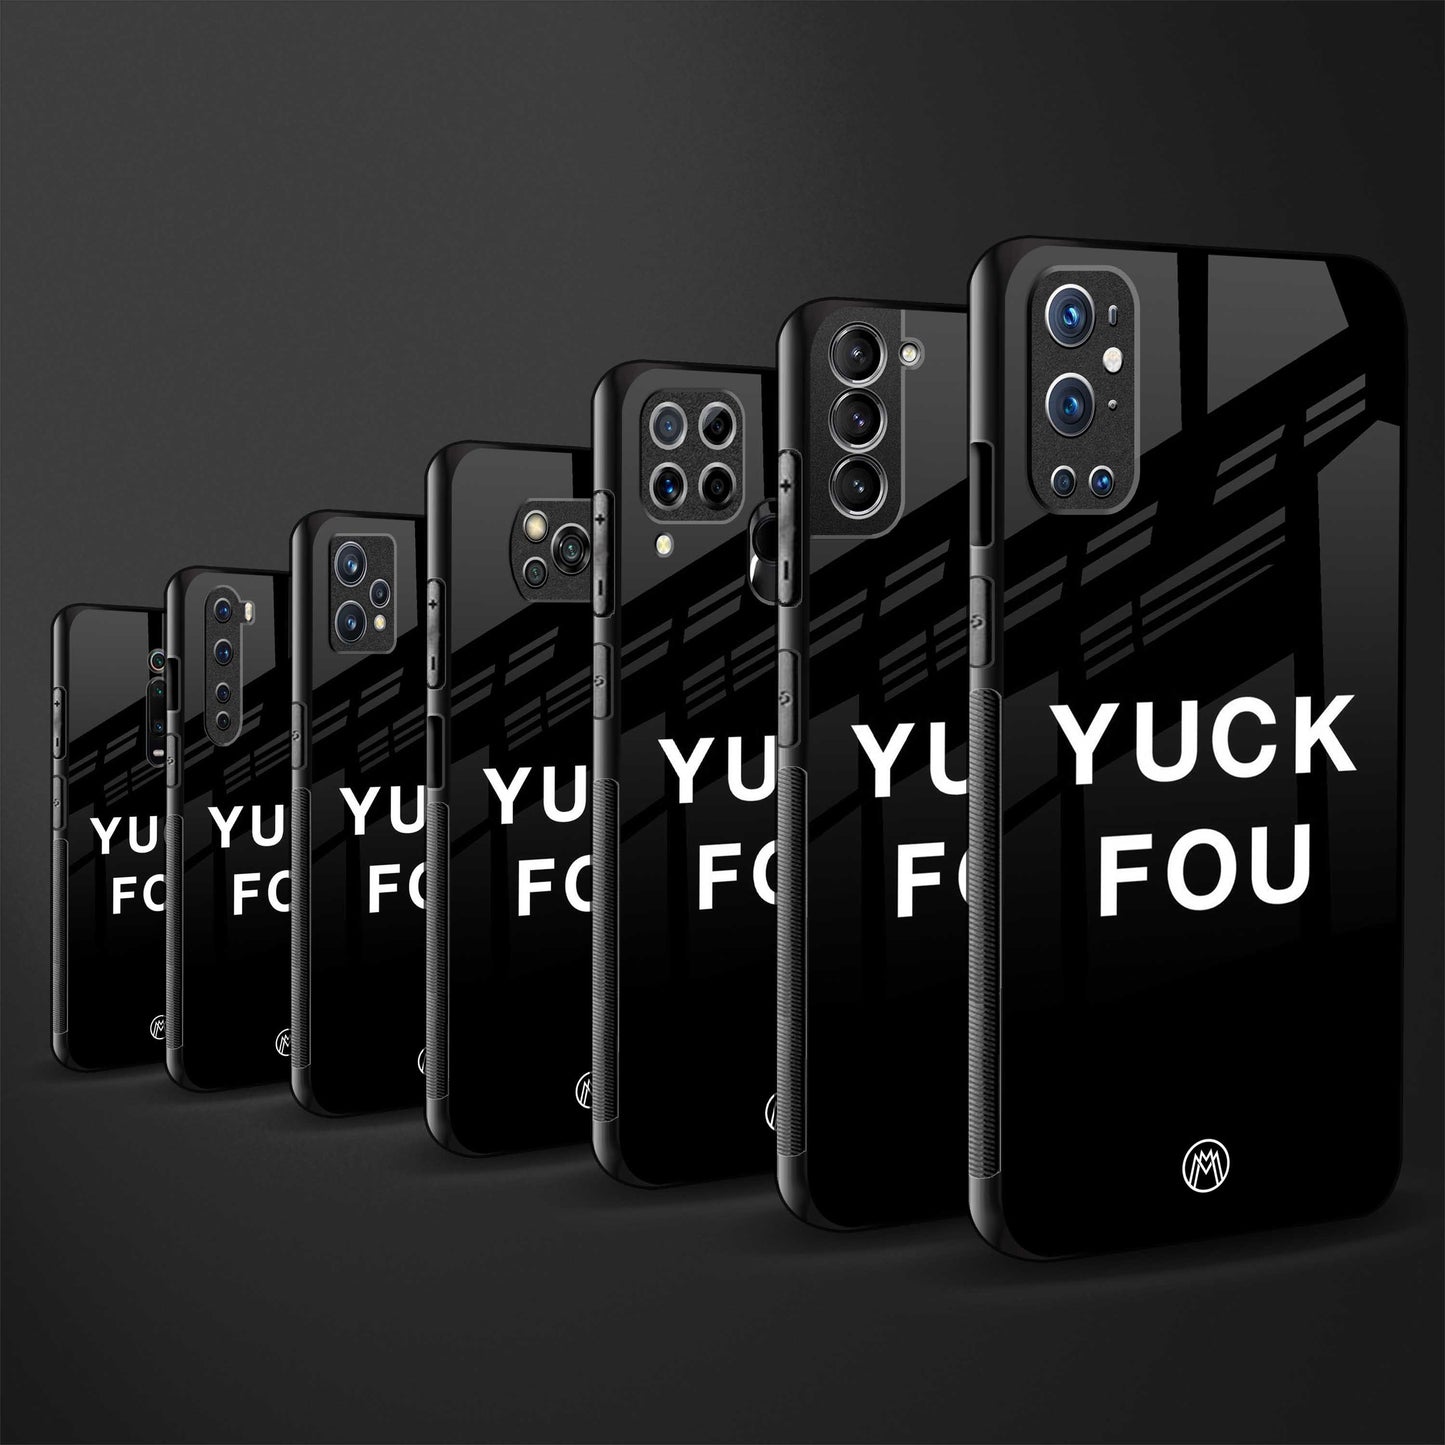 yuck fou glass case for iphone 6 image-3